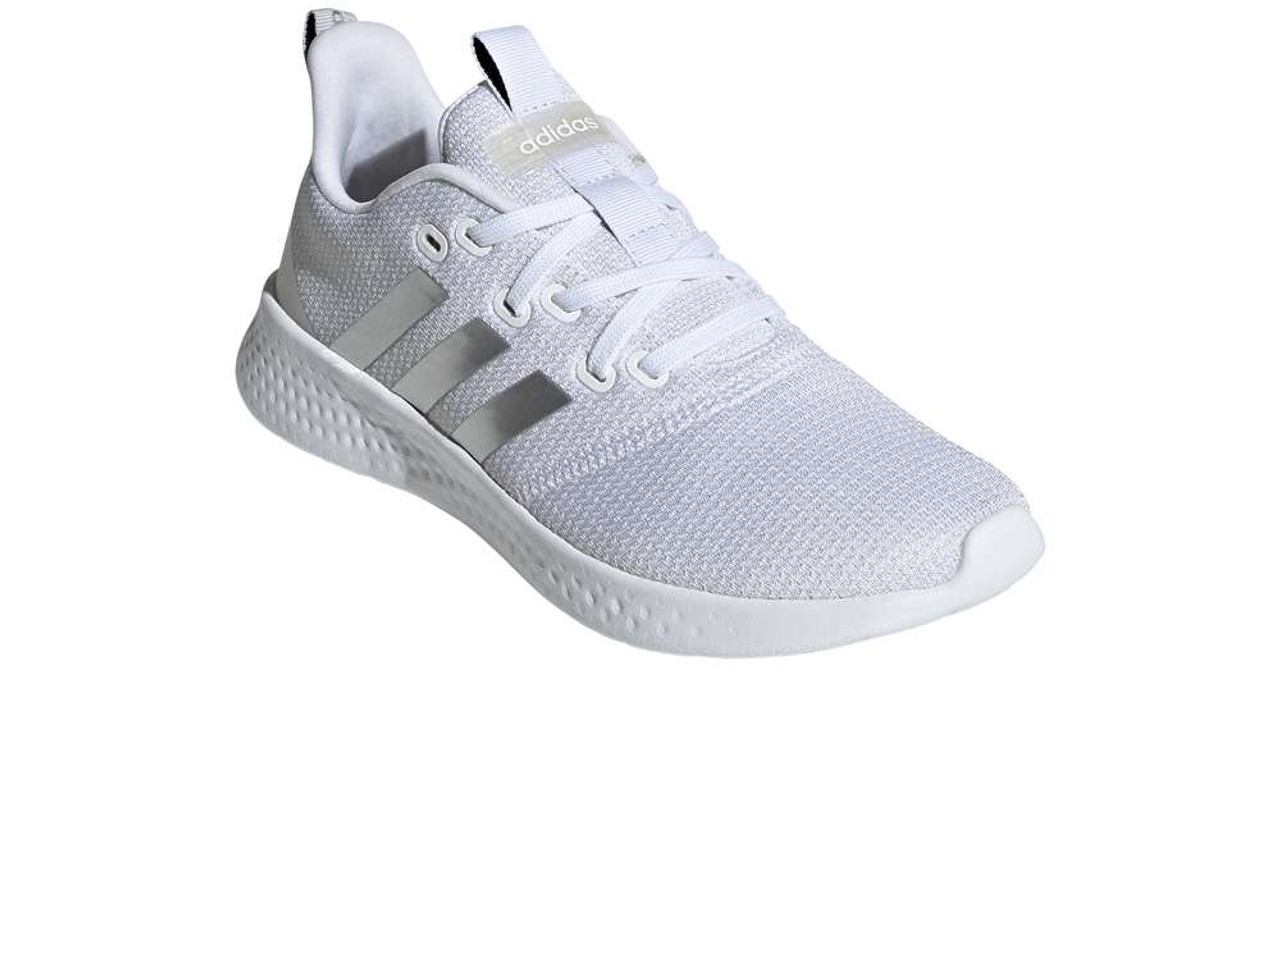 20 Trendy Adidas Sneakers for Women | Adidas shoes women, Adidas sneakers,  Shoes sneakers adidas